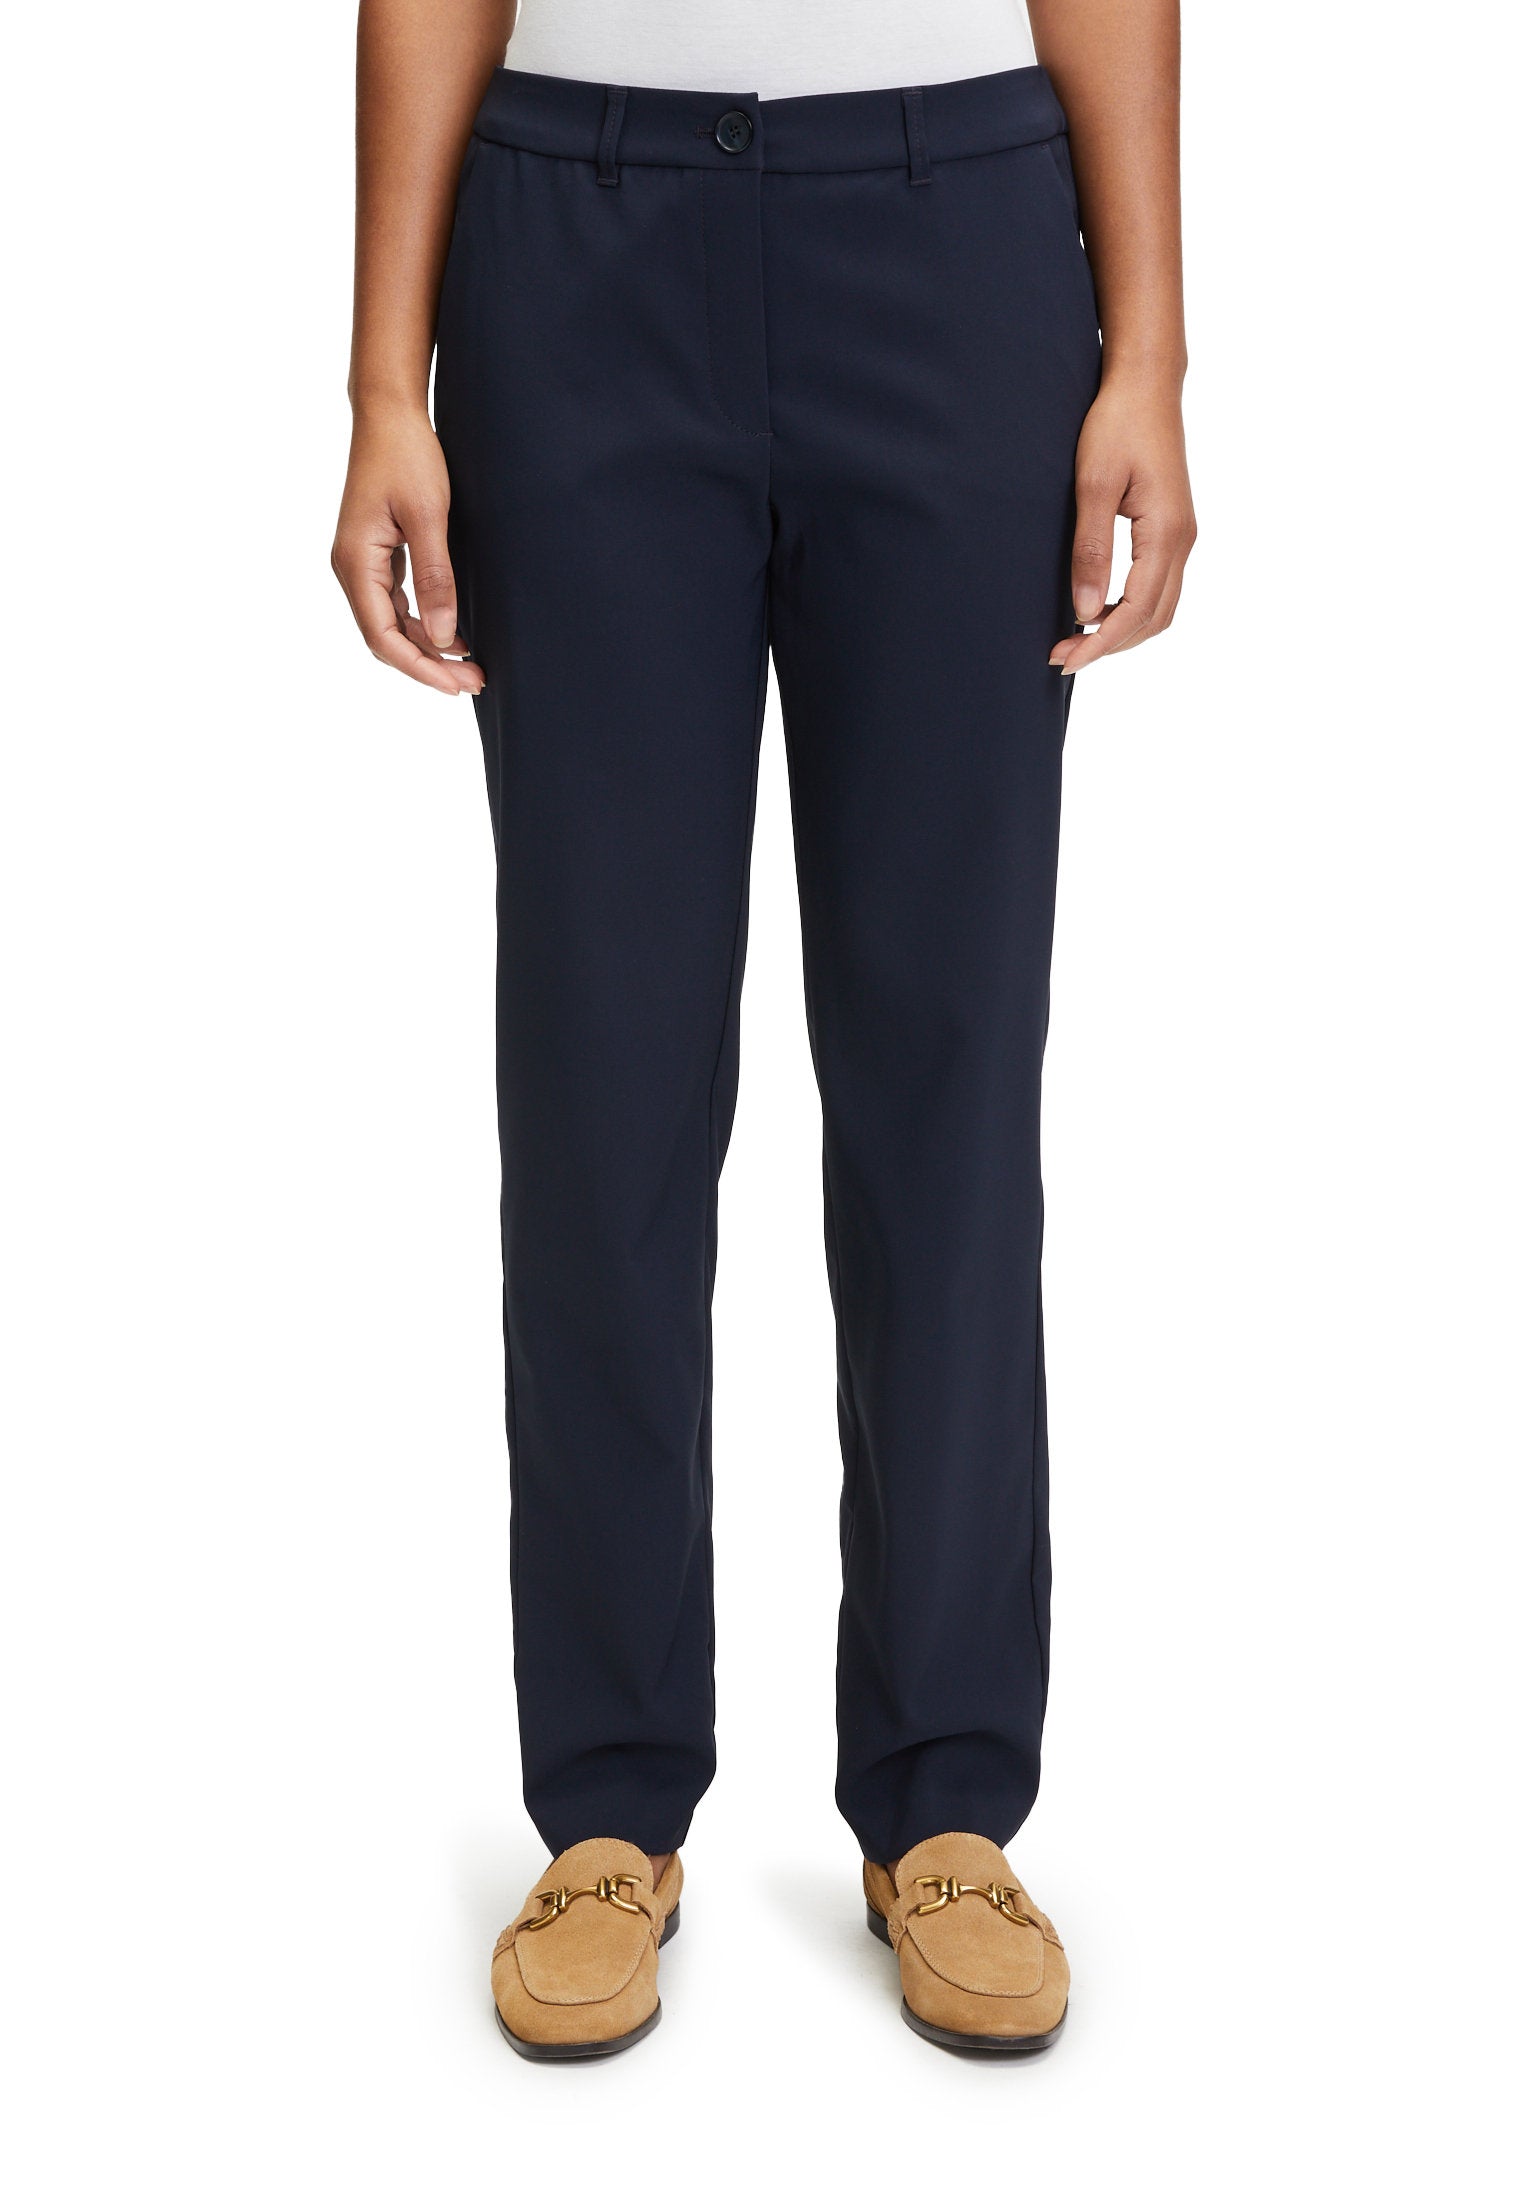 Business Trousers
With Crease_6002-1080_8345_05